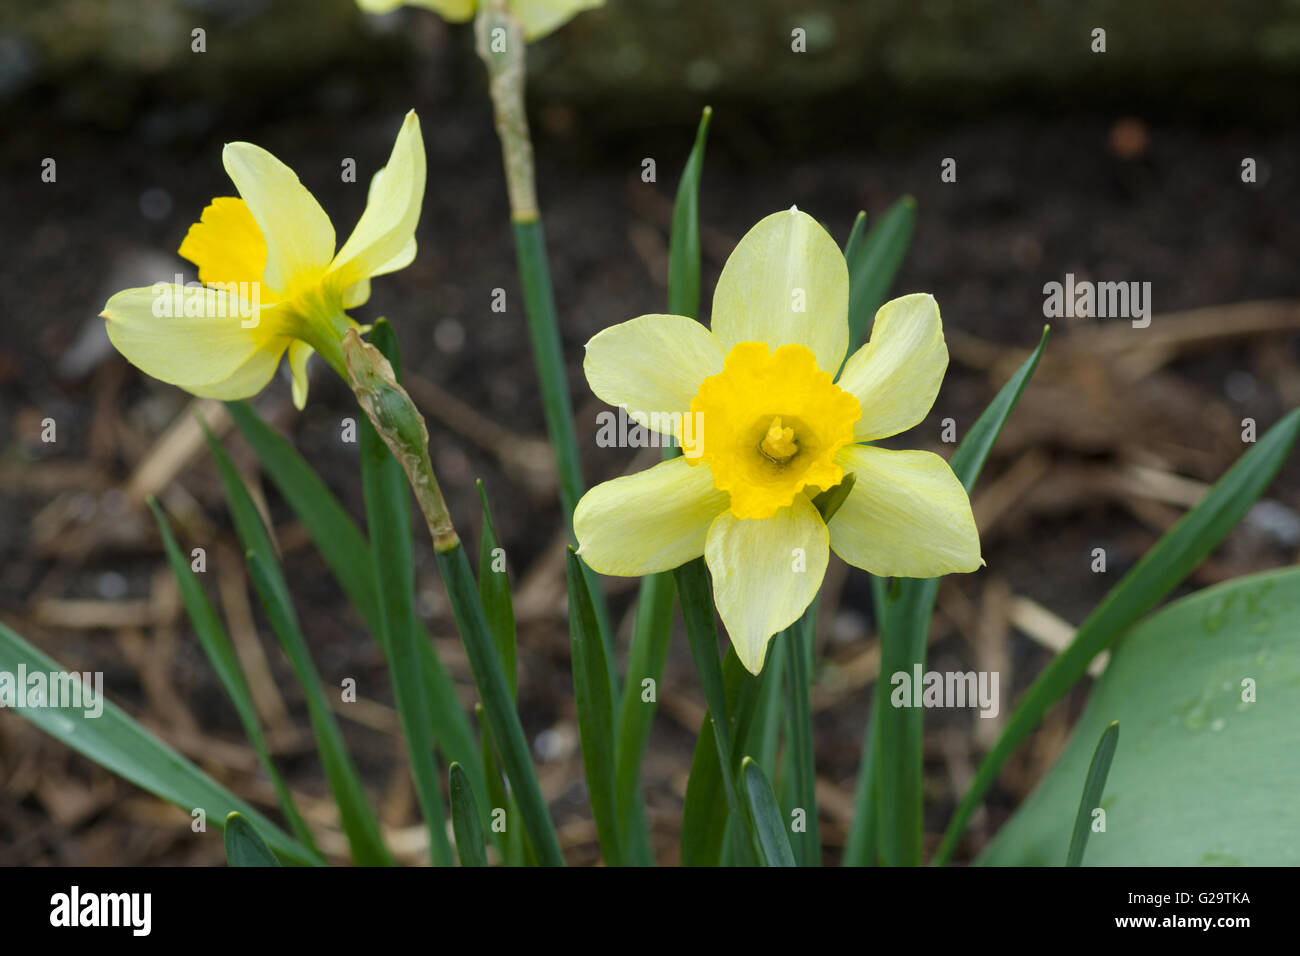 yellow daffodil flowers bloom in the garden Stock Photo